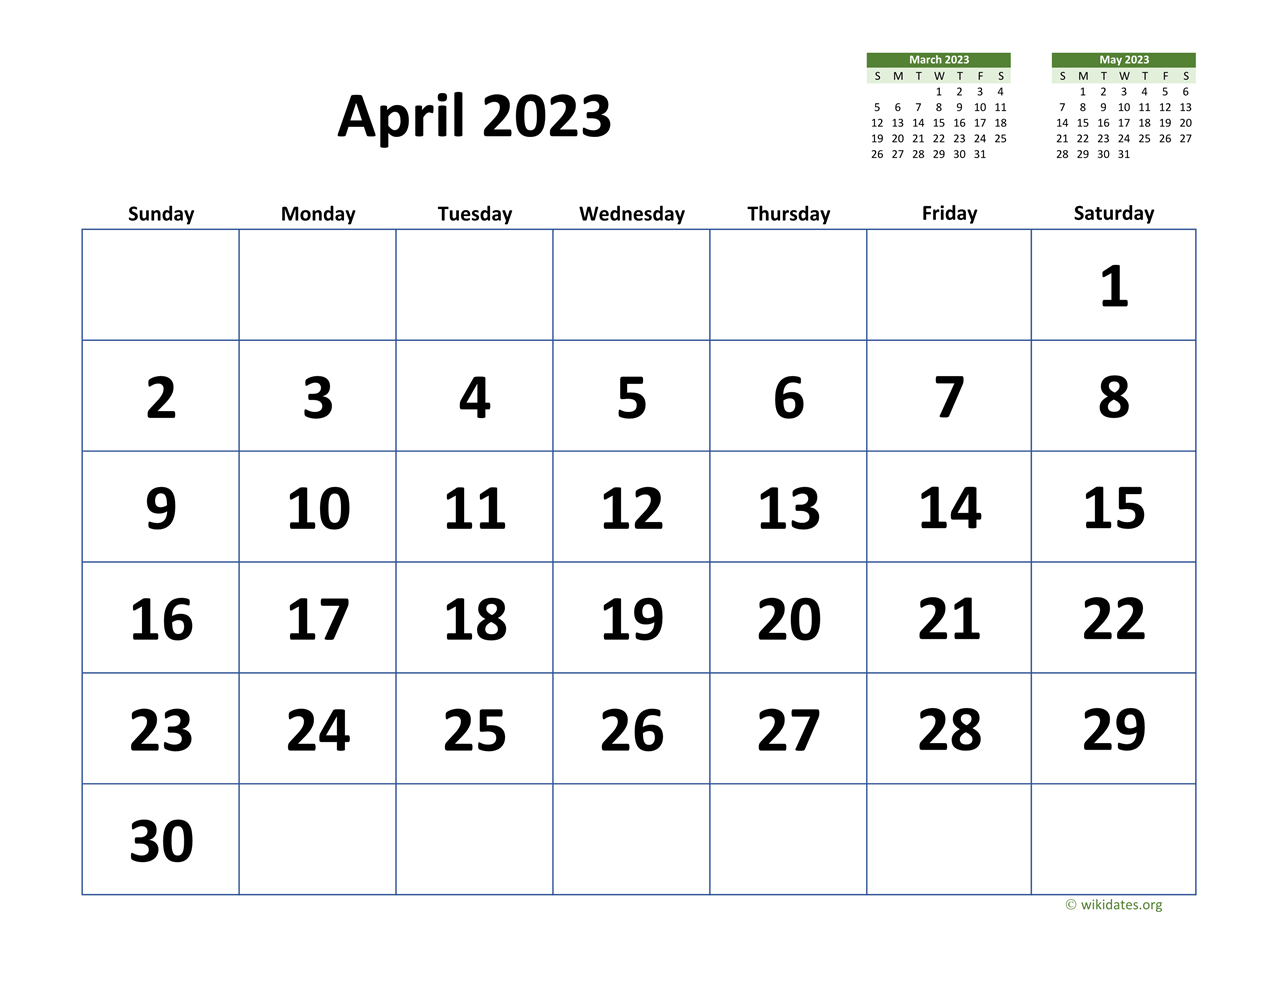 April 2023 Calendar with Extra-large Dates | WikiDates.org